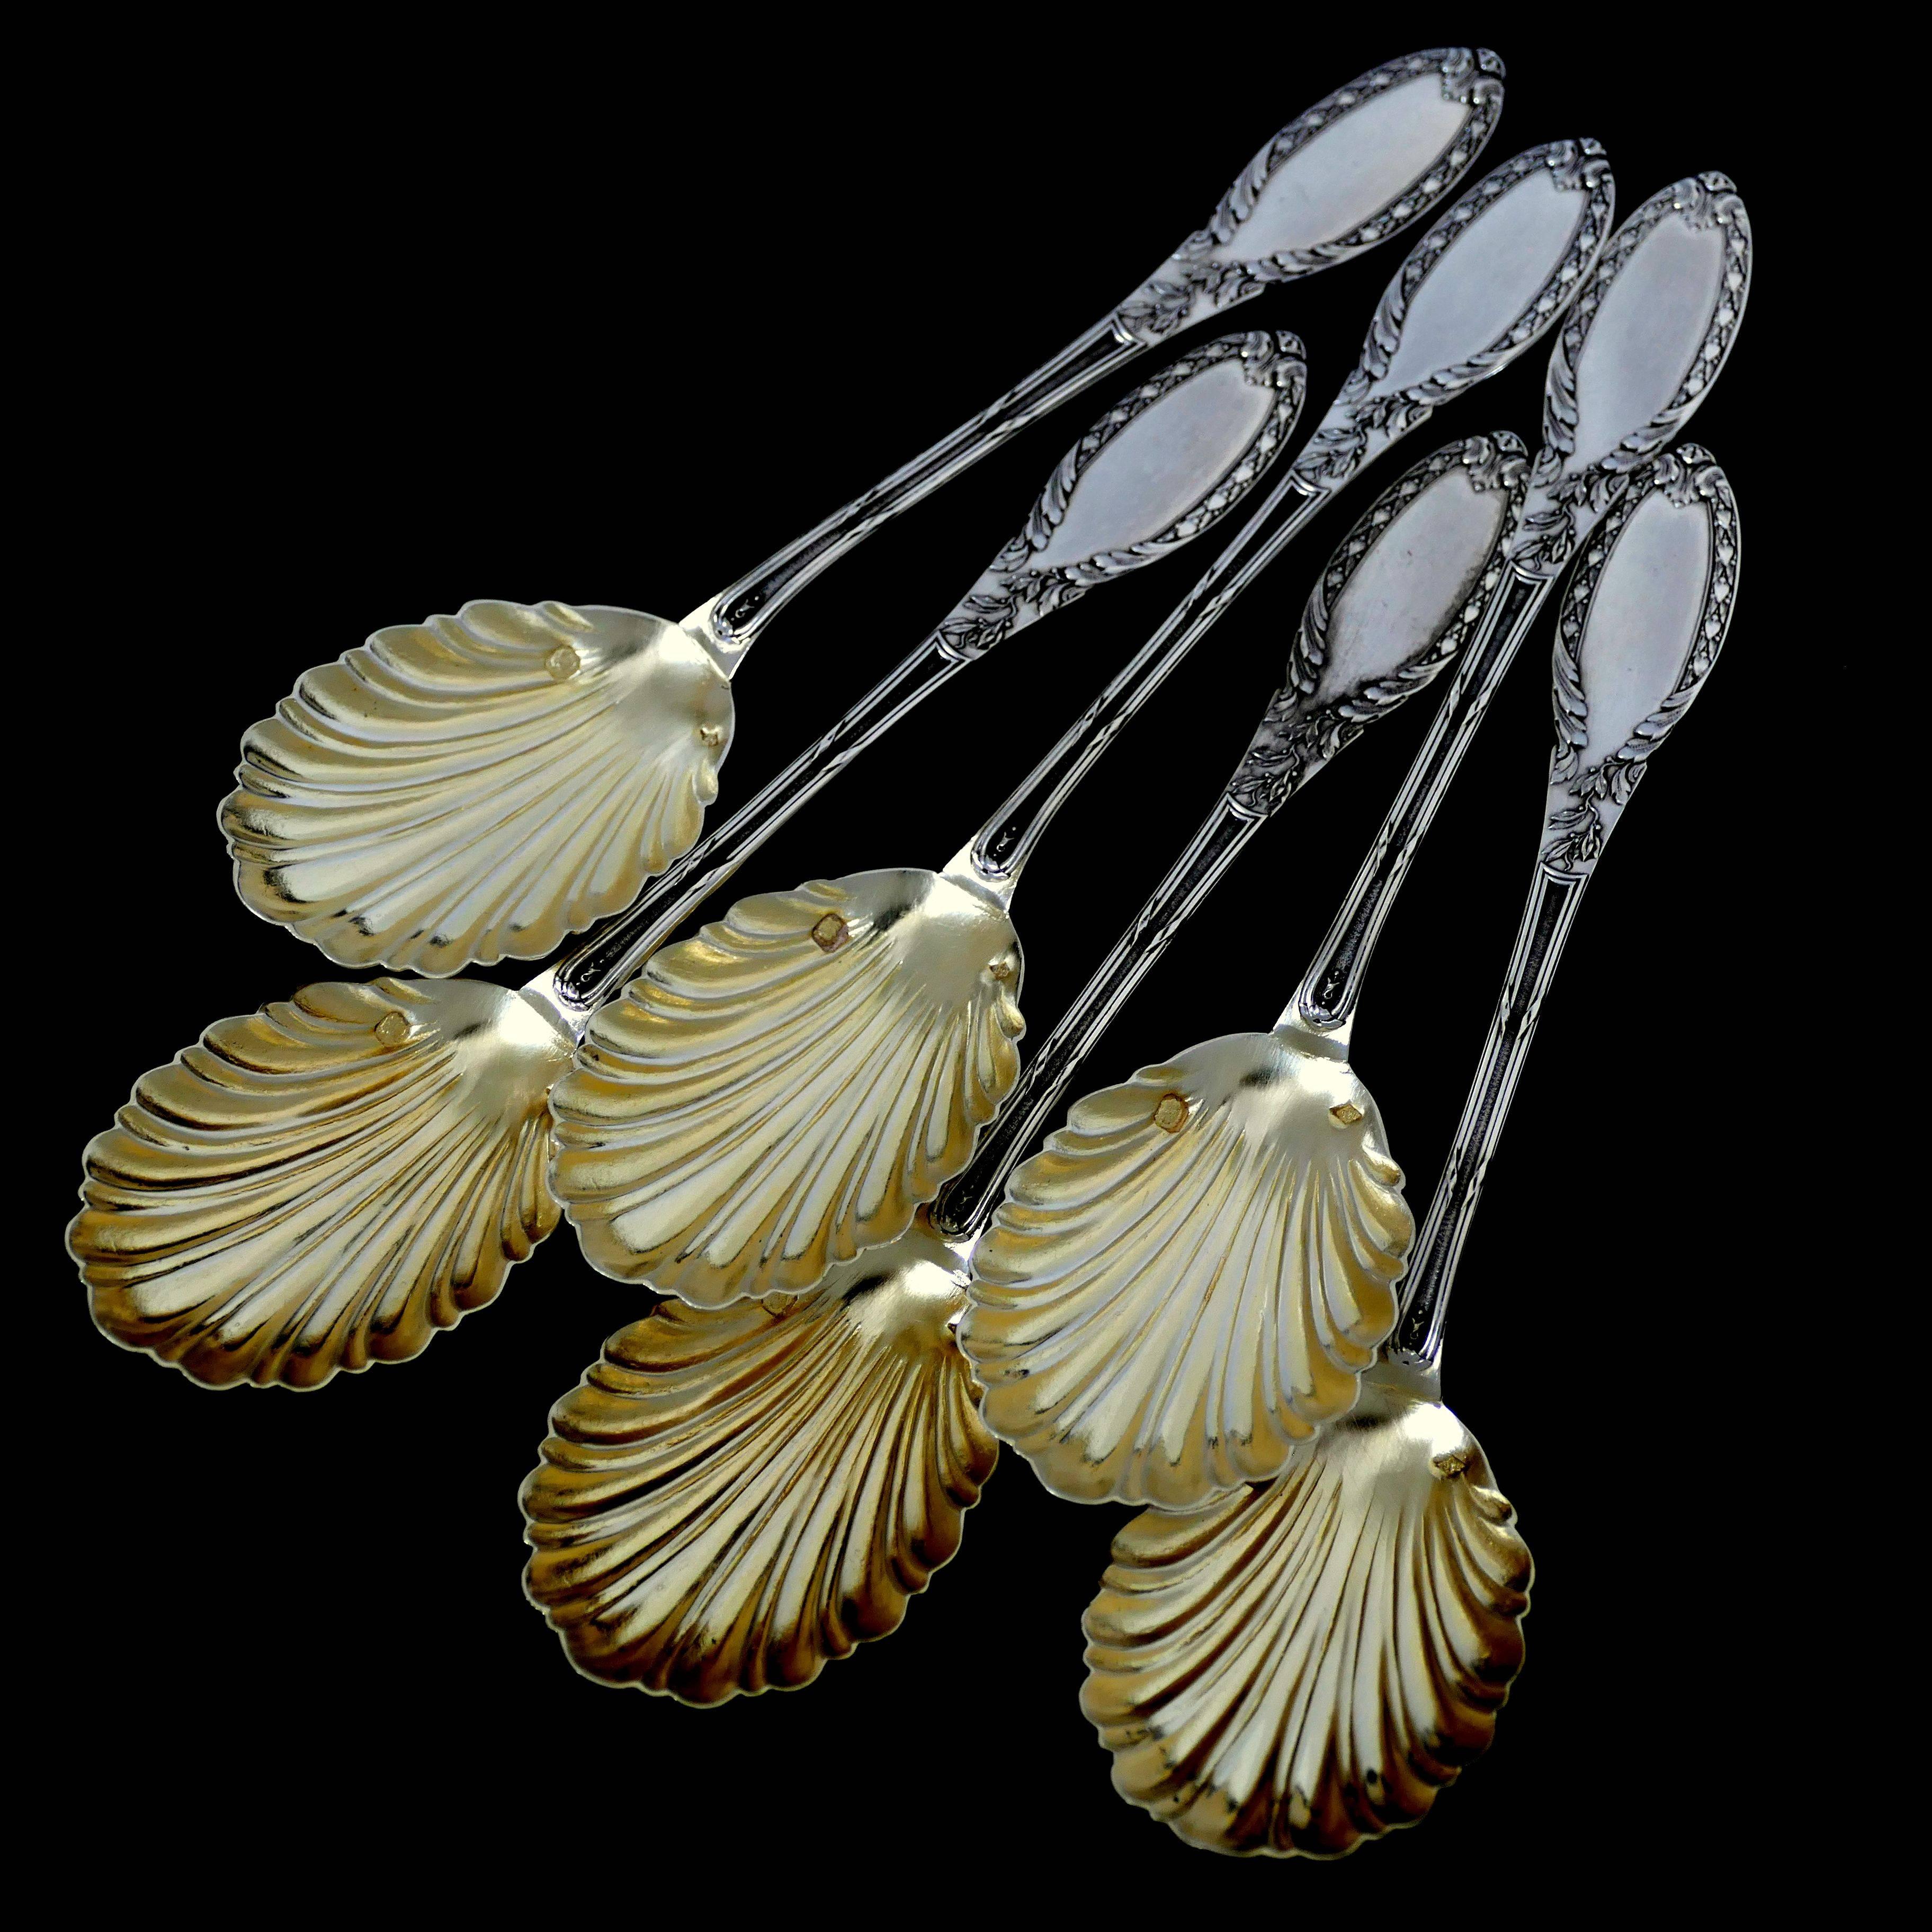 Rare French Sterling Silver 18-Karat Gold Strawberry Service Seven-Piece For Sale 3